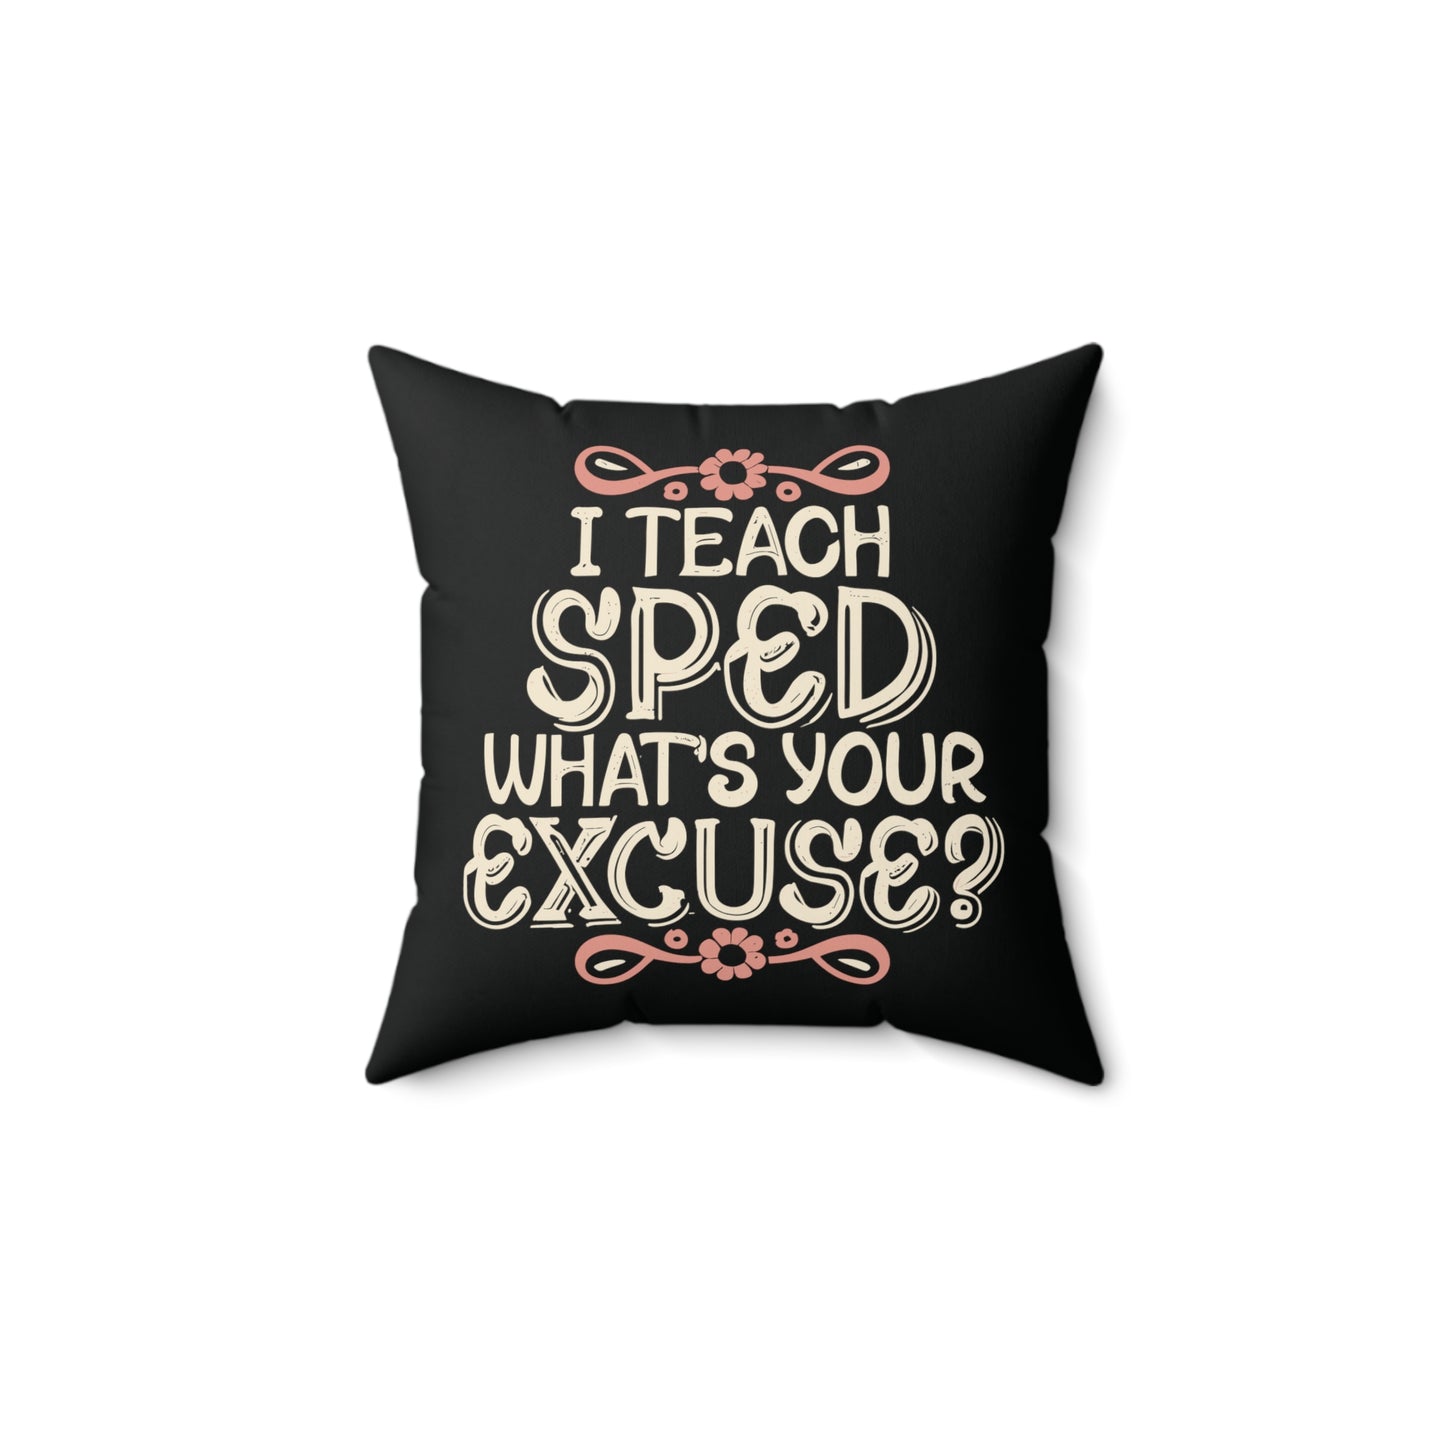 Special Ed Teacher Pillow - "I Teach SPED - What's Your Excuse"